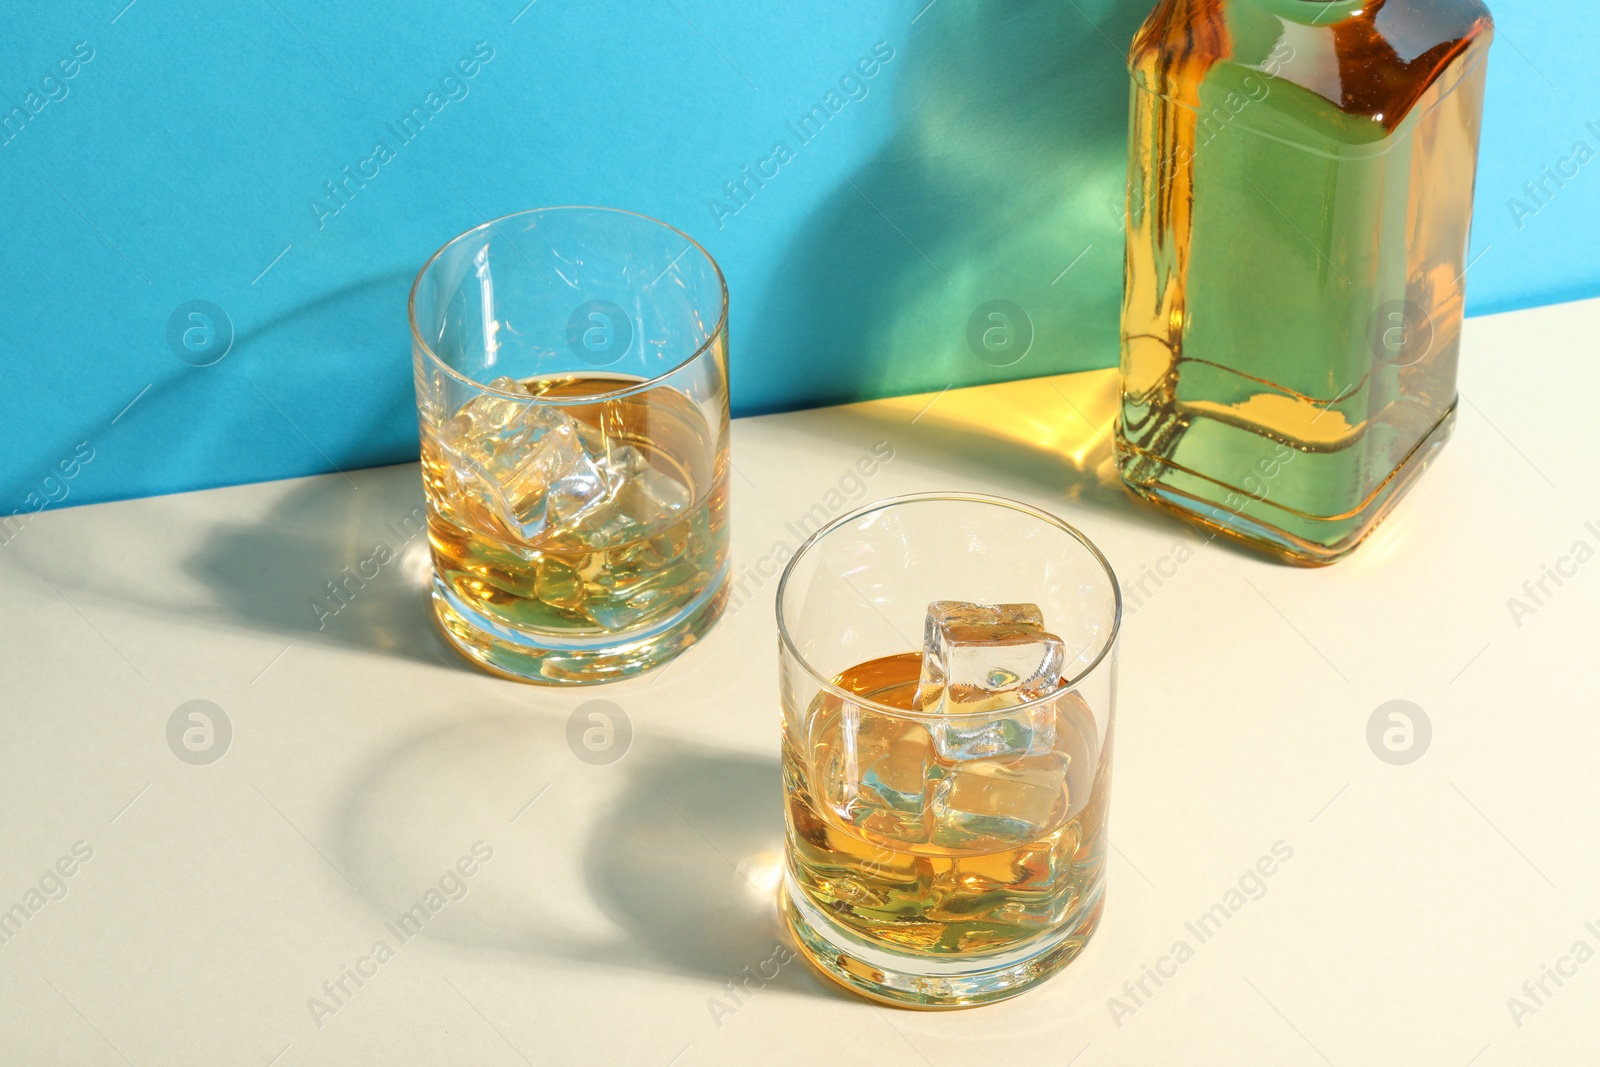 Photo of Whiskey with ice cubes in glasses and bottle on white table against light blue background